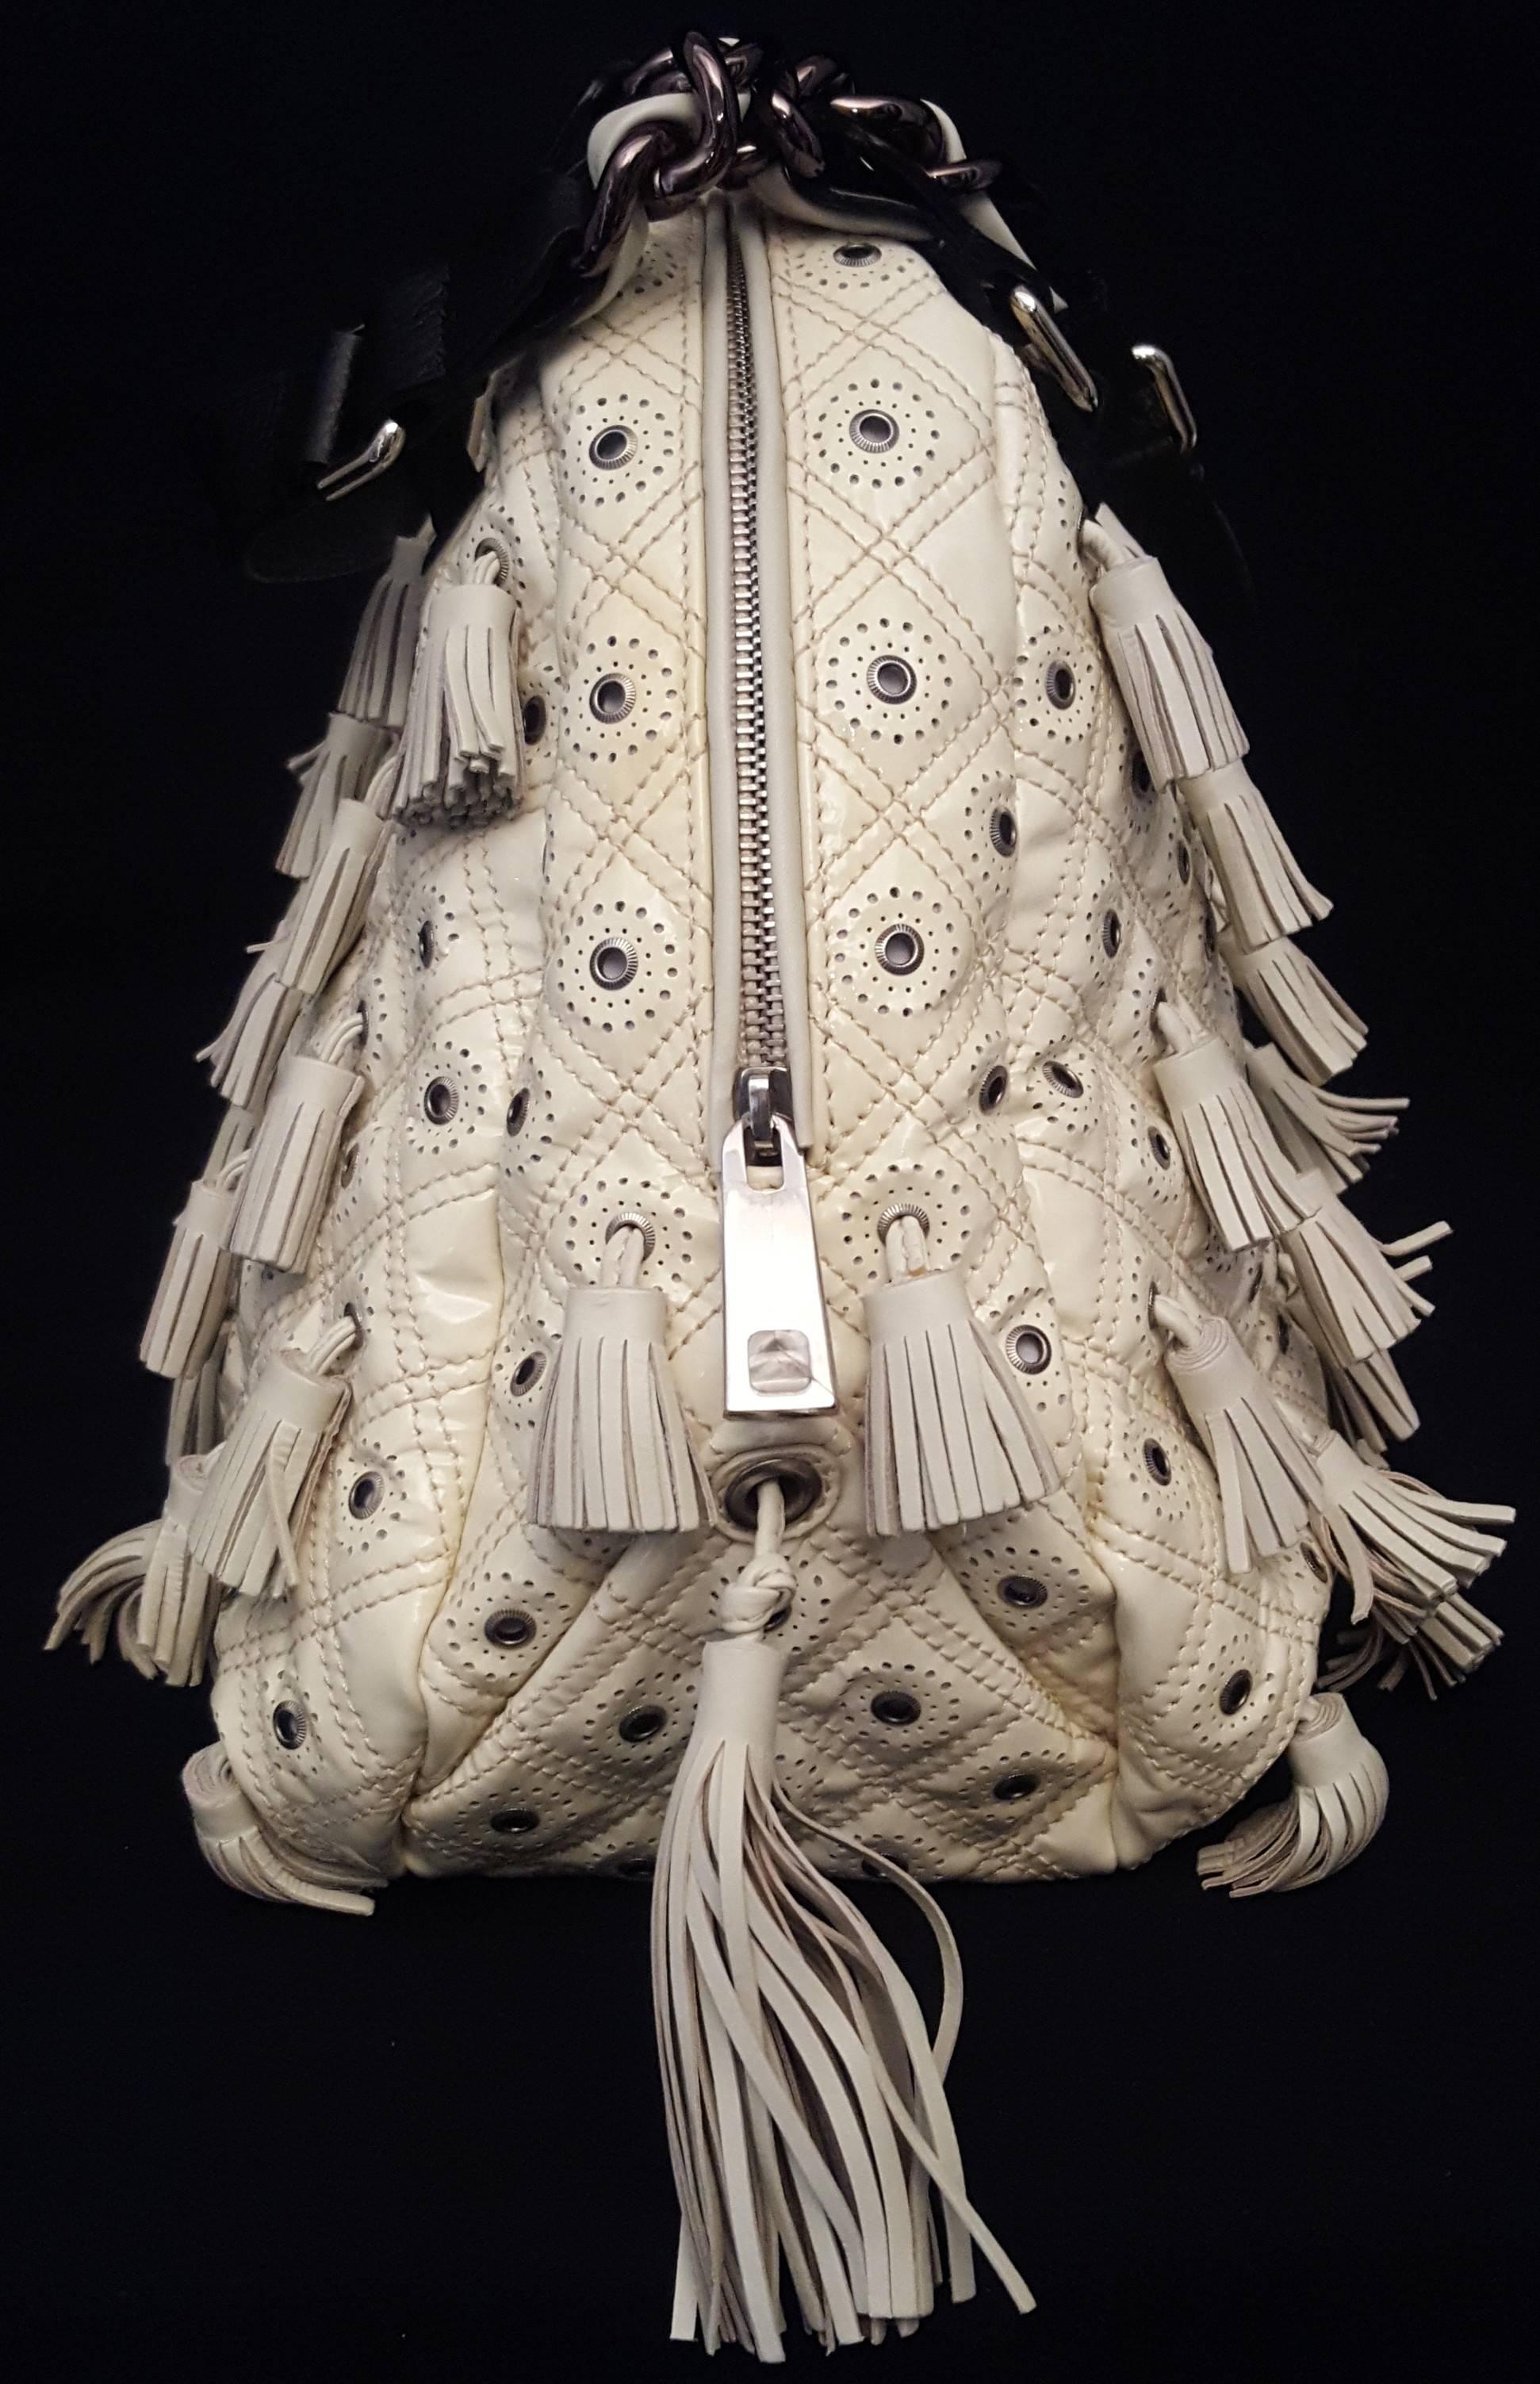 Marc Jacobs ivory patent leather Dancer bag is from the spring/summer 2010 collection featuring perforated leather with grommets and tassels details all over this outstanding bag with 2 larger tassels at each side.  This bag is lined in gold tone